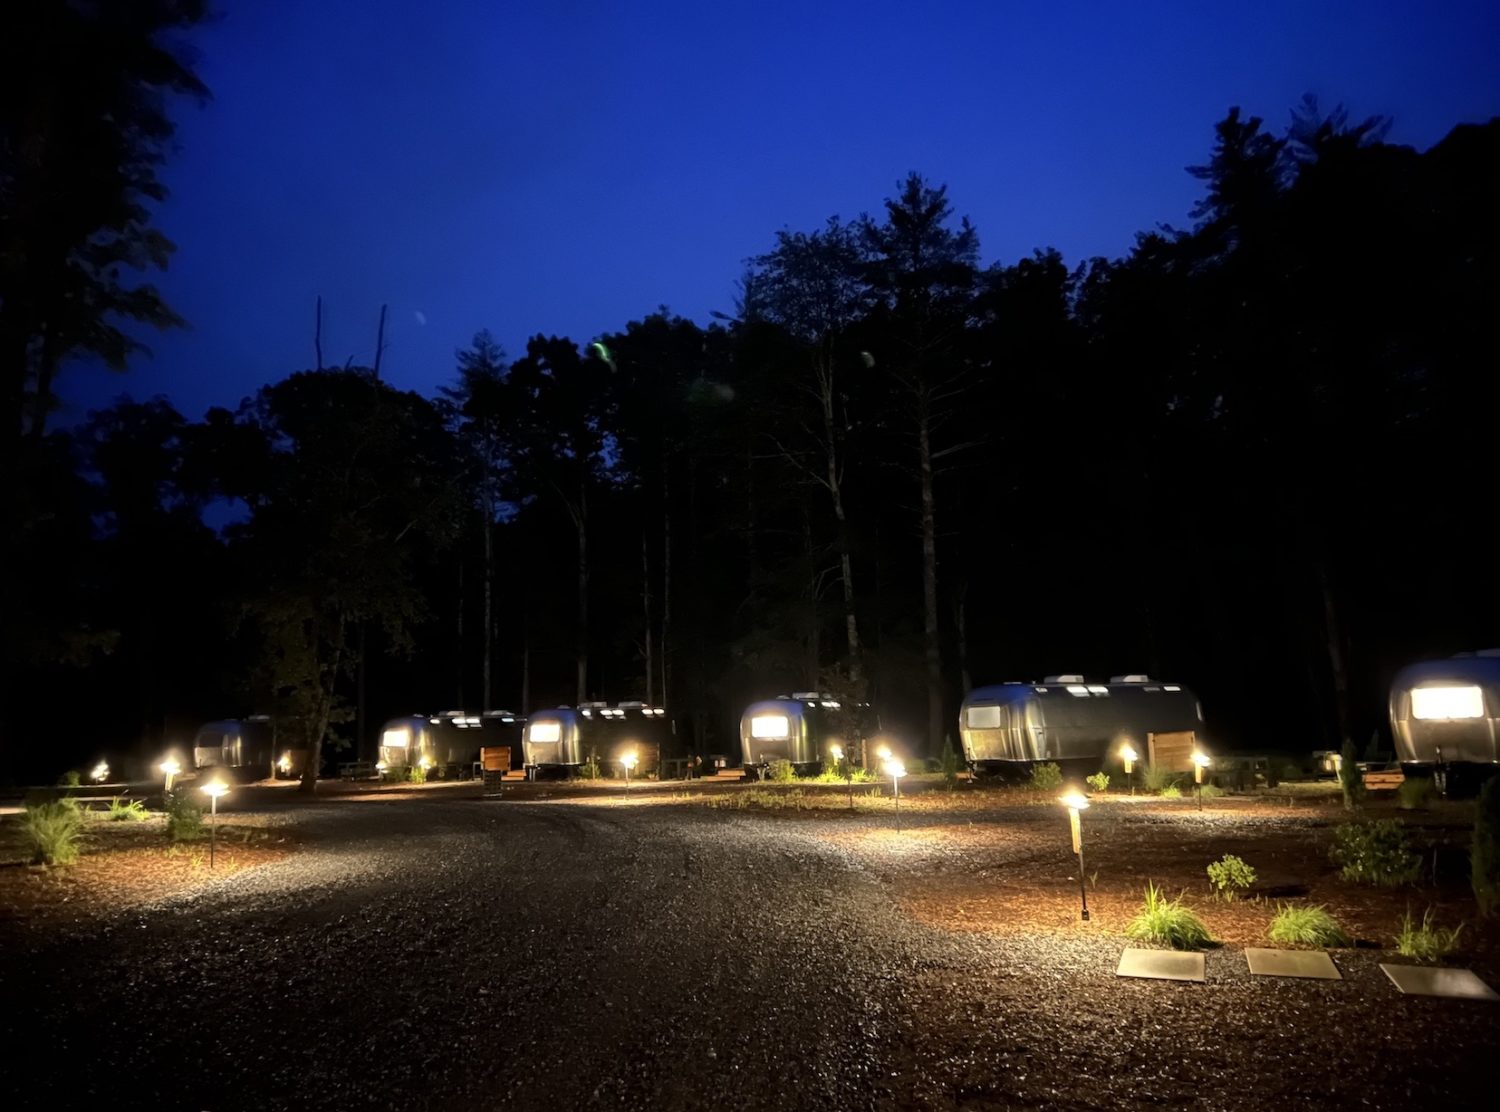 AutoCamp Catskills The campground at night is peaceful and wild all at once